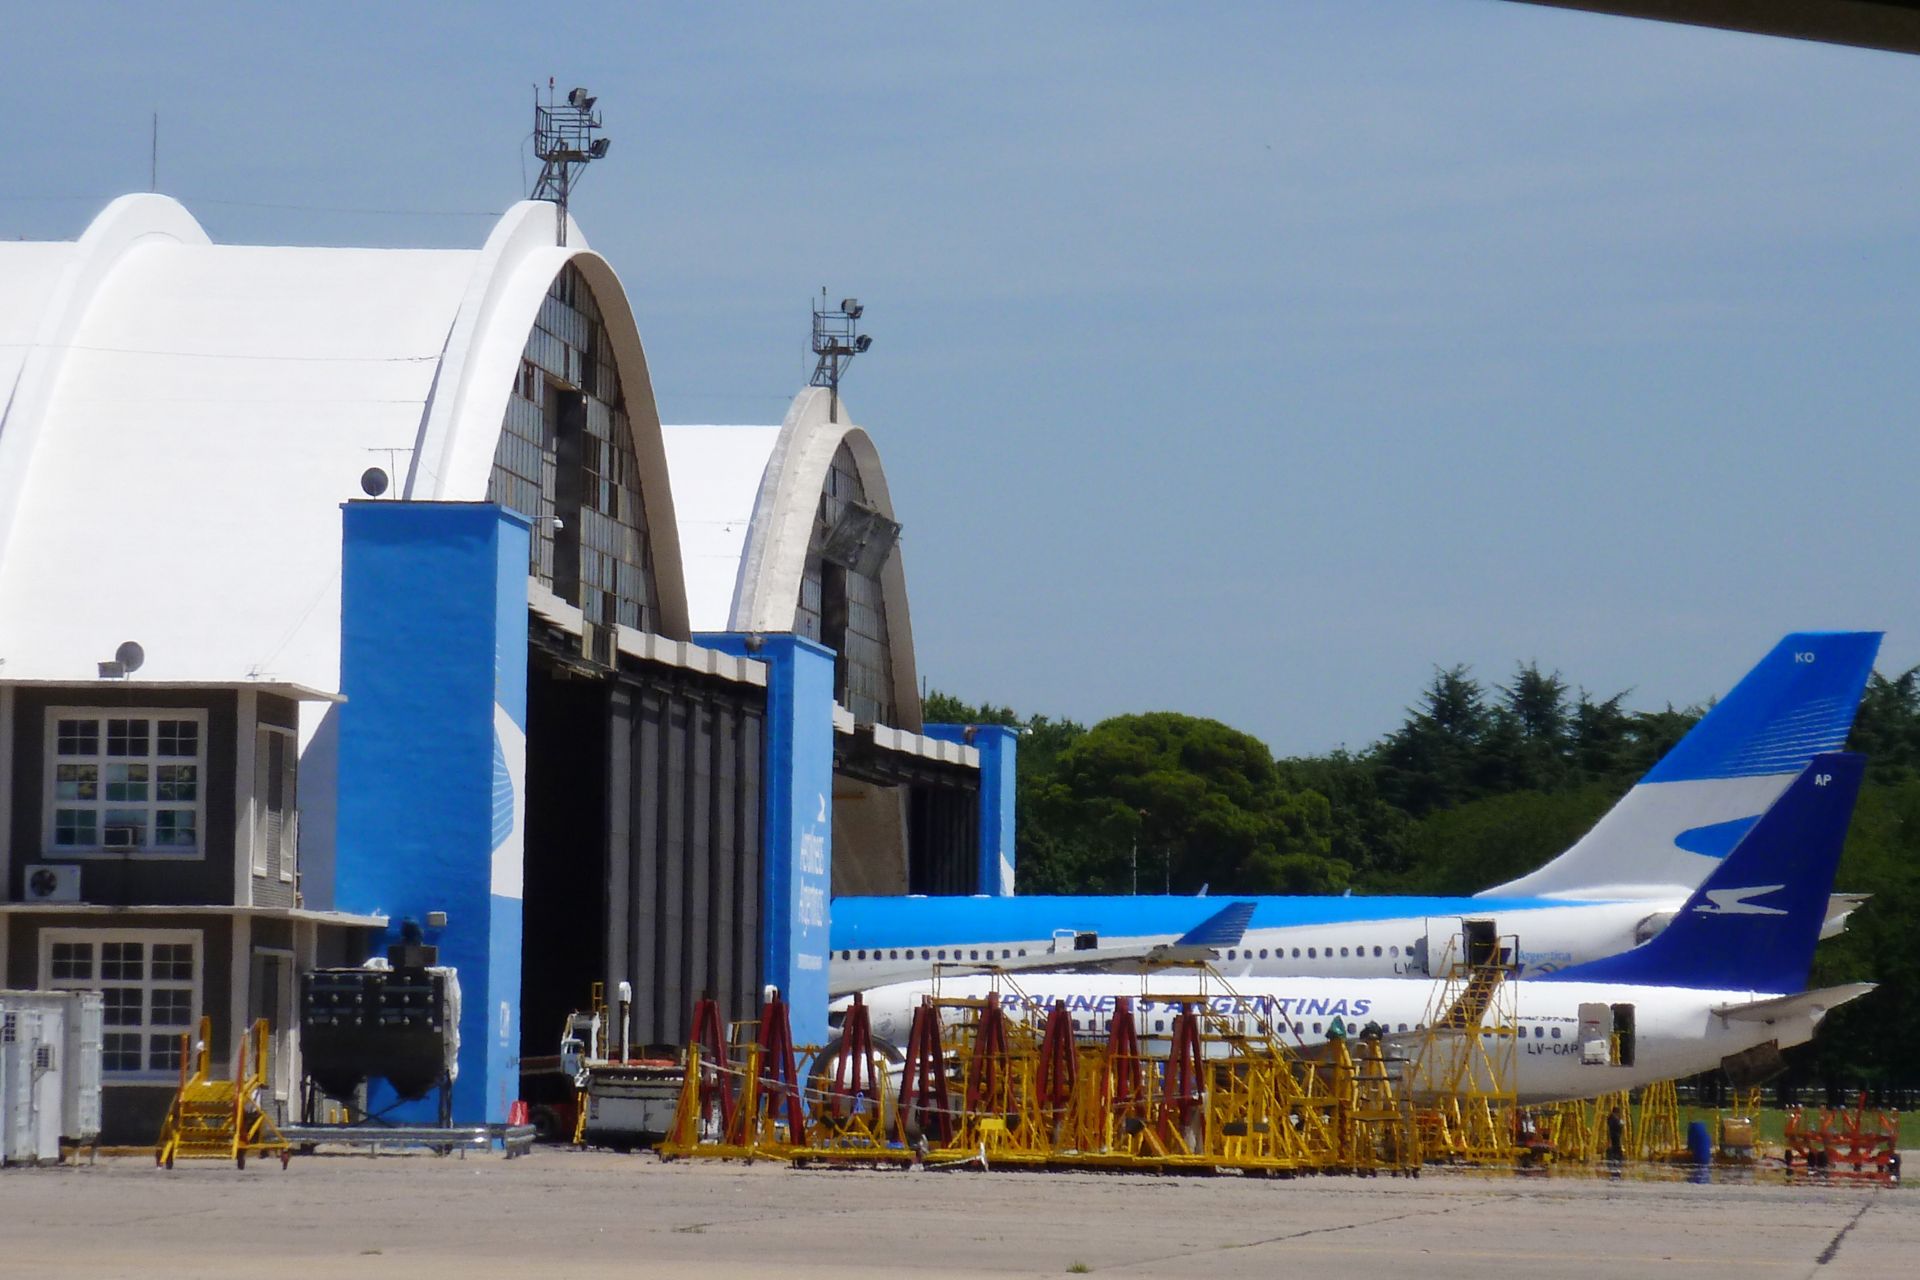 Sika Cool roof applied on a hangar airport in Argentina